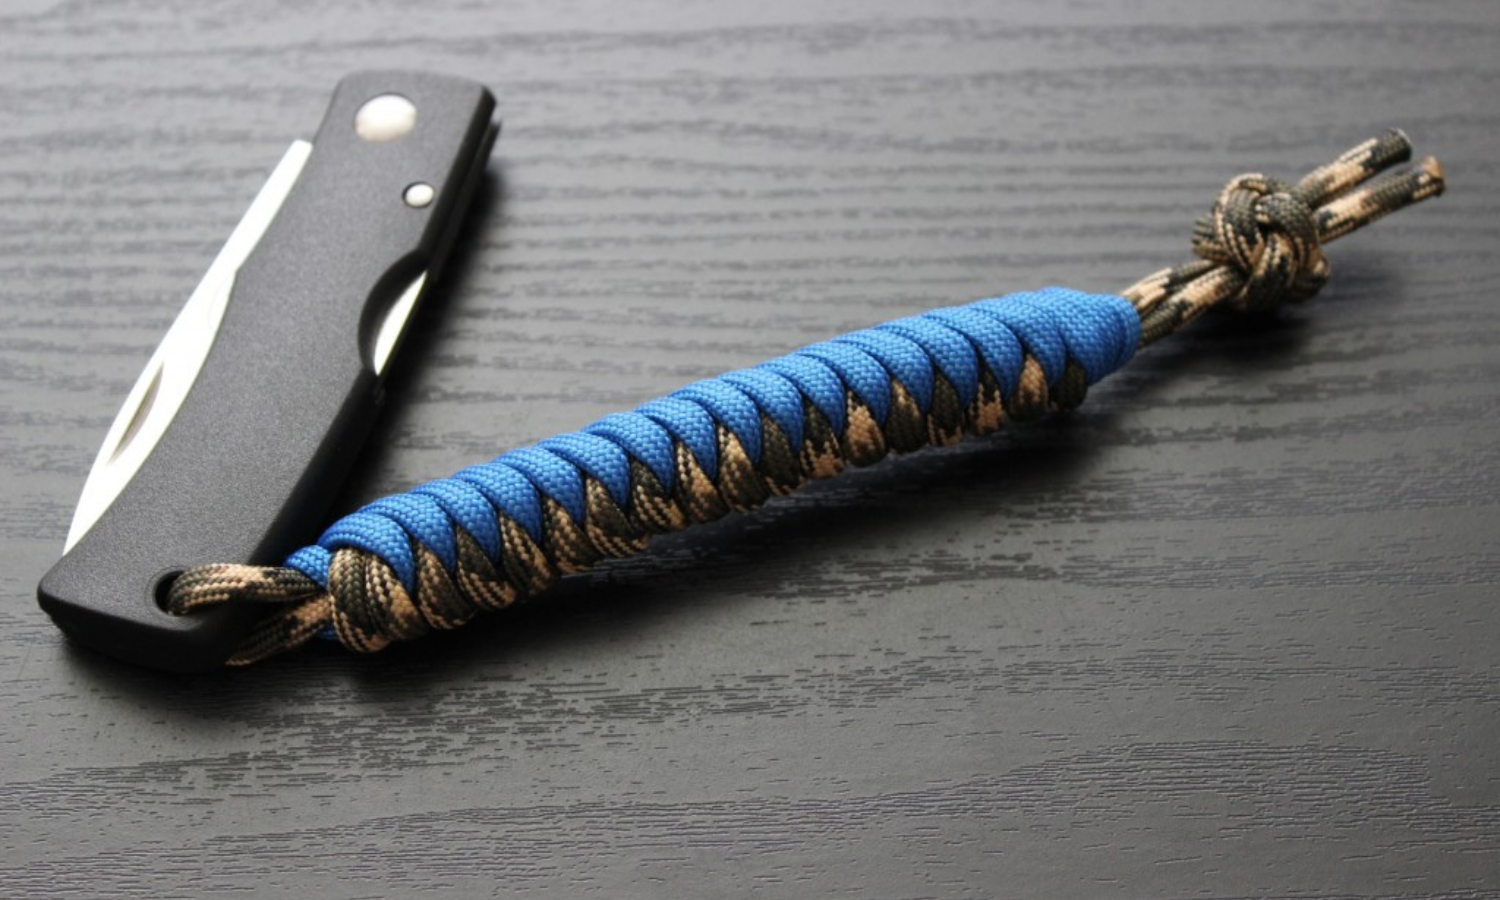 How to Make a Paracord Lanyard for a Knife